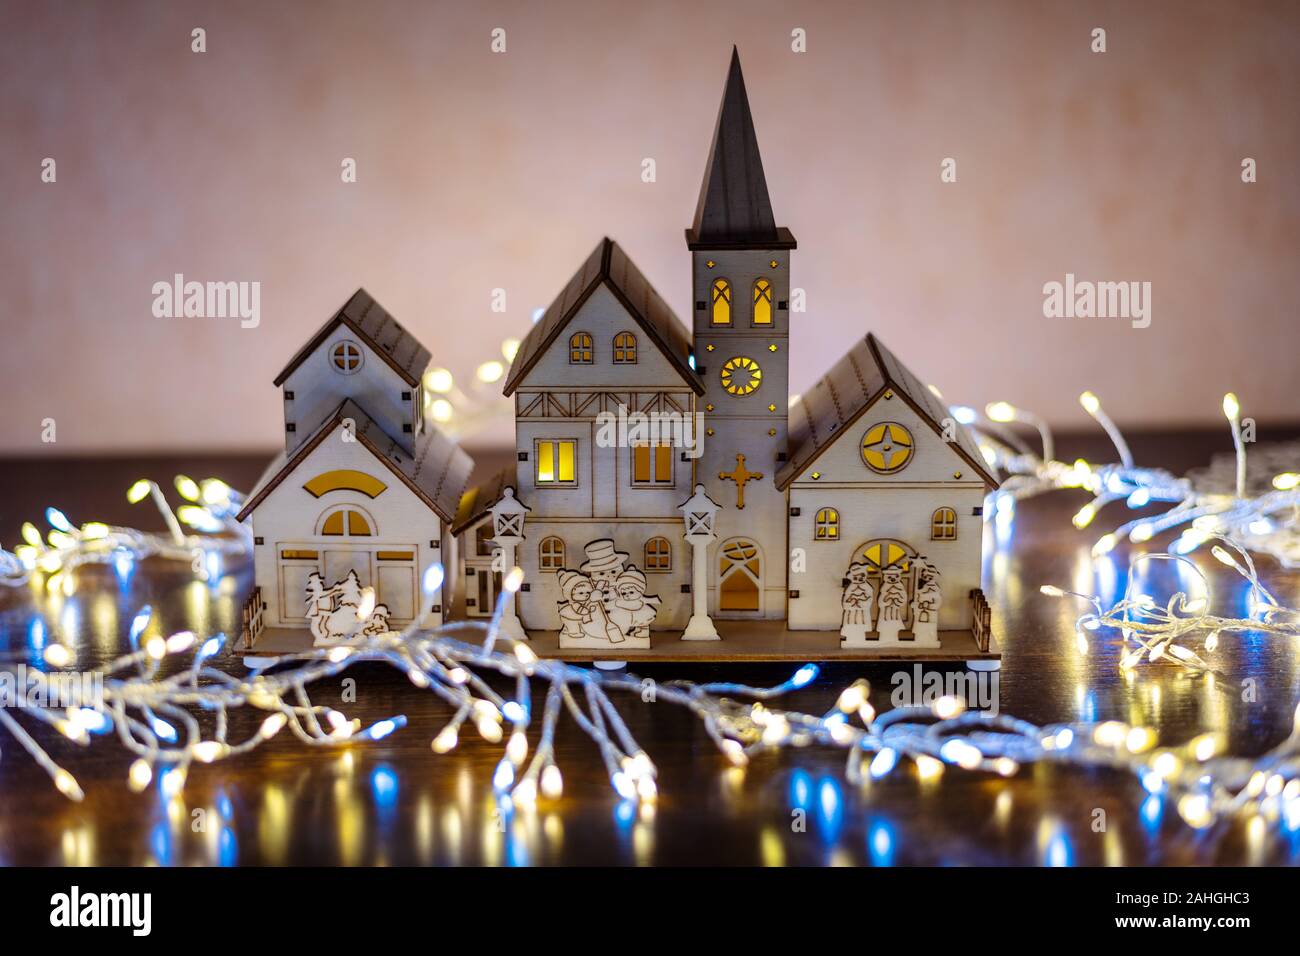 Christmas background with a wooden village illuminated, surrounded by led light tinsel. Stock Photo